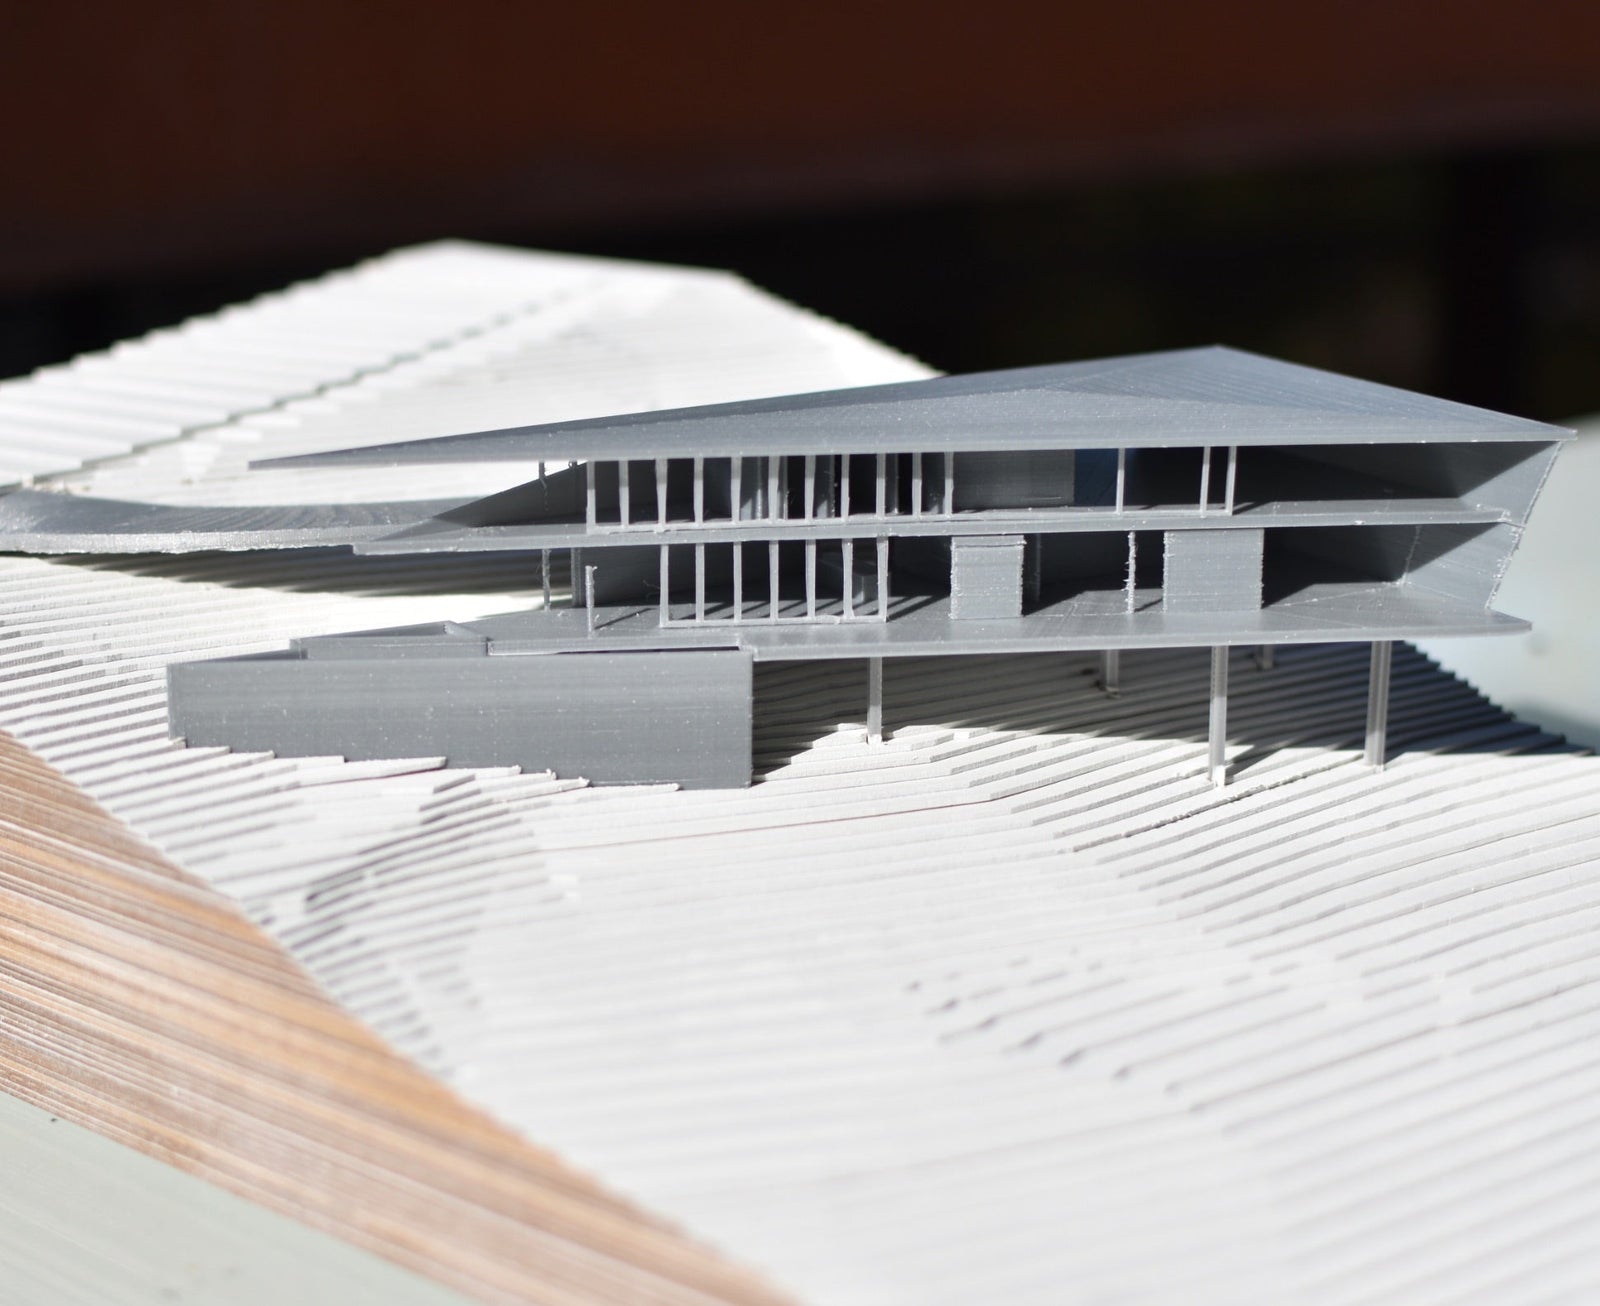 How Architects Are Using 3D Printing